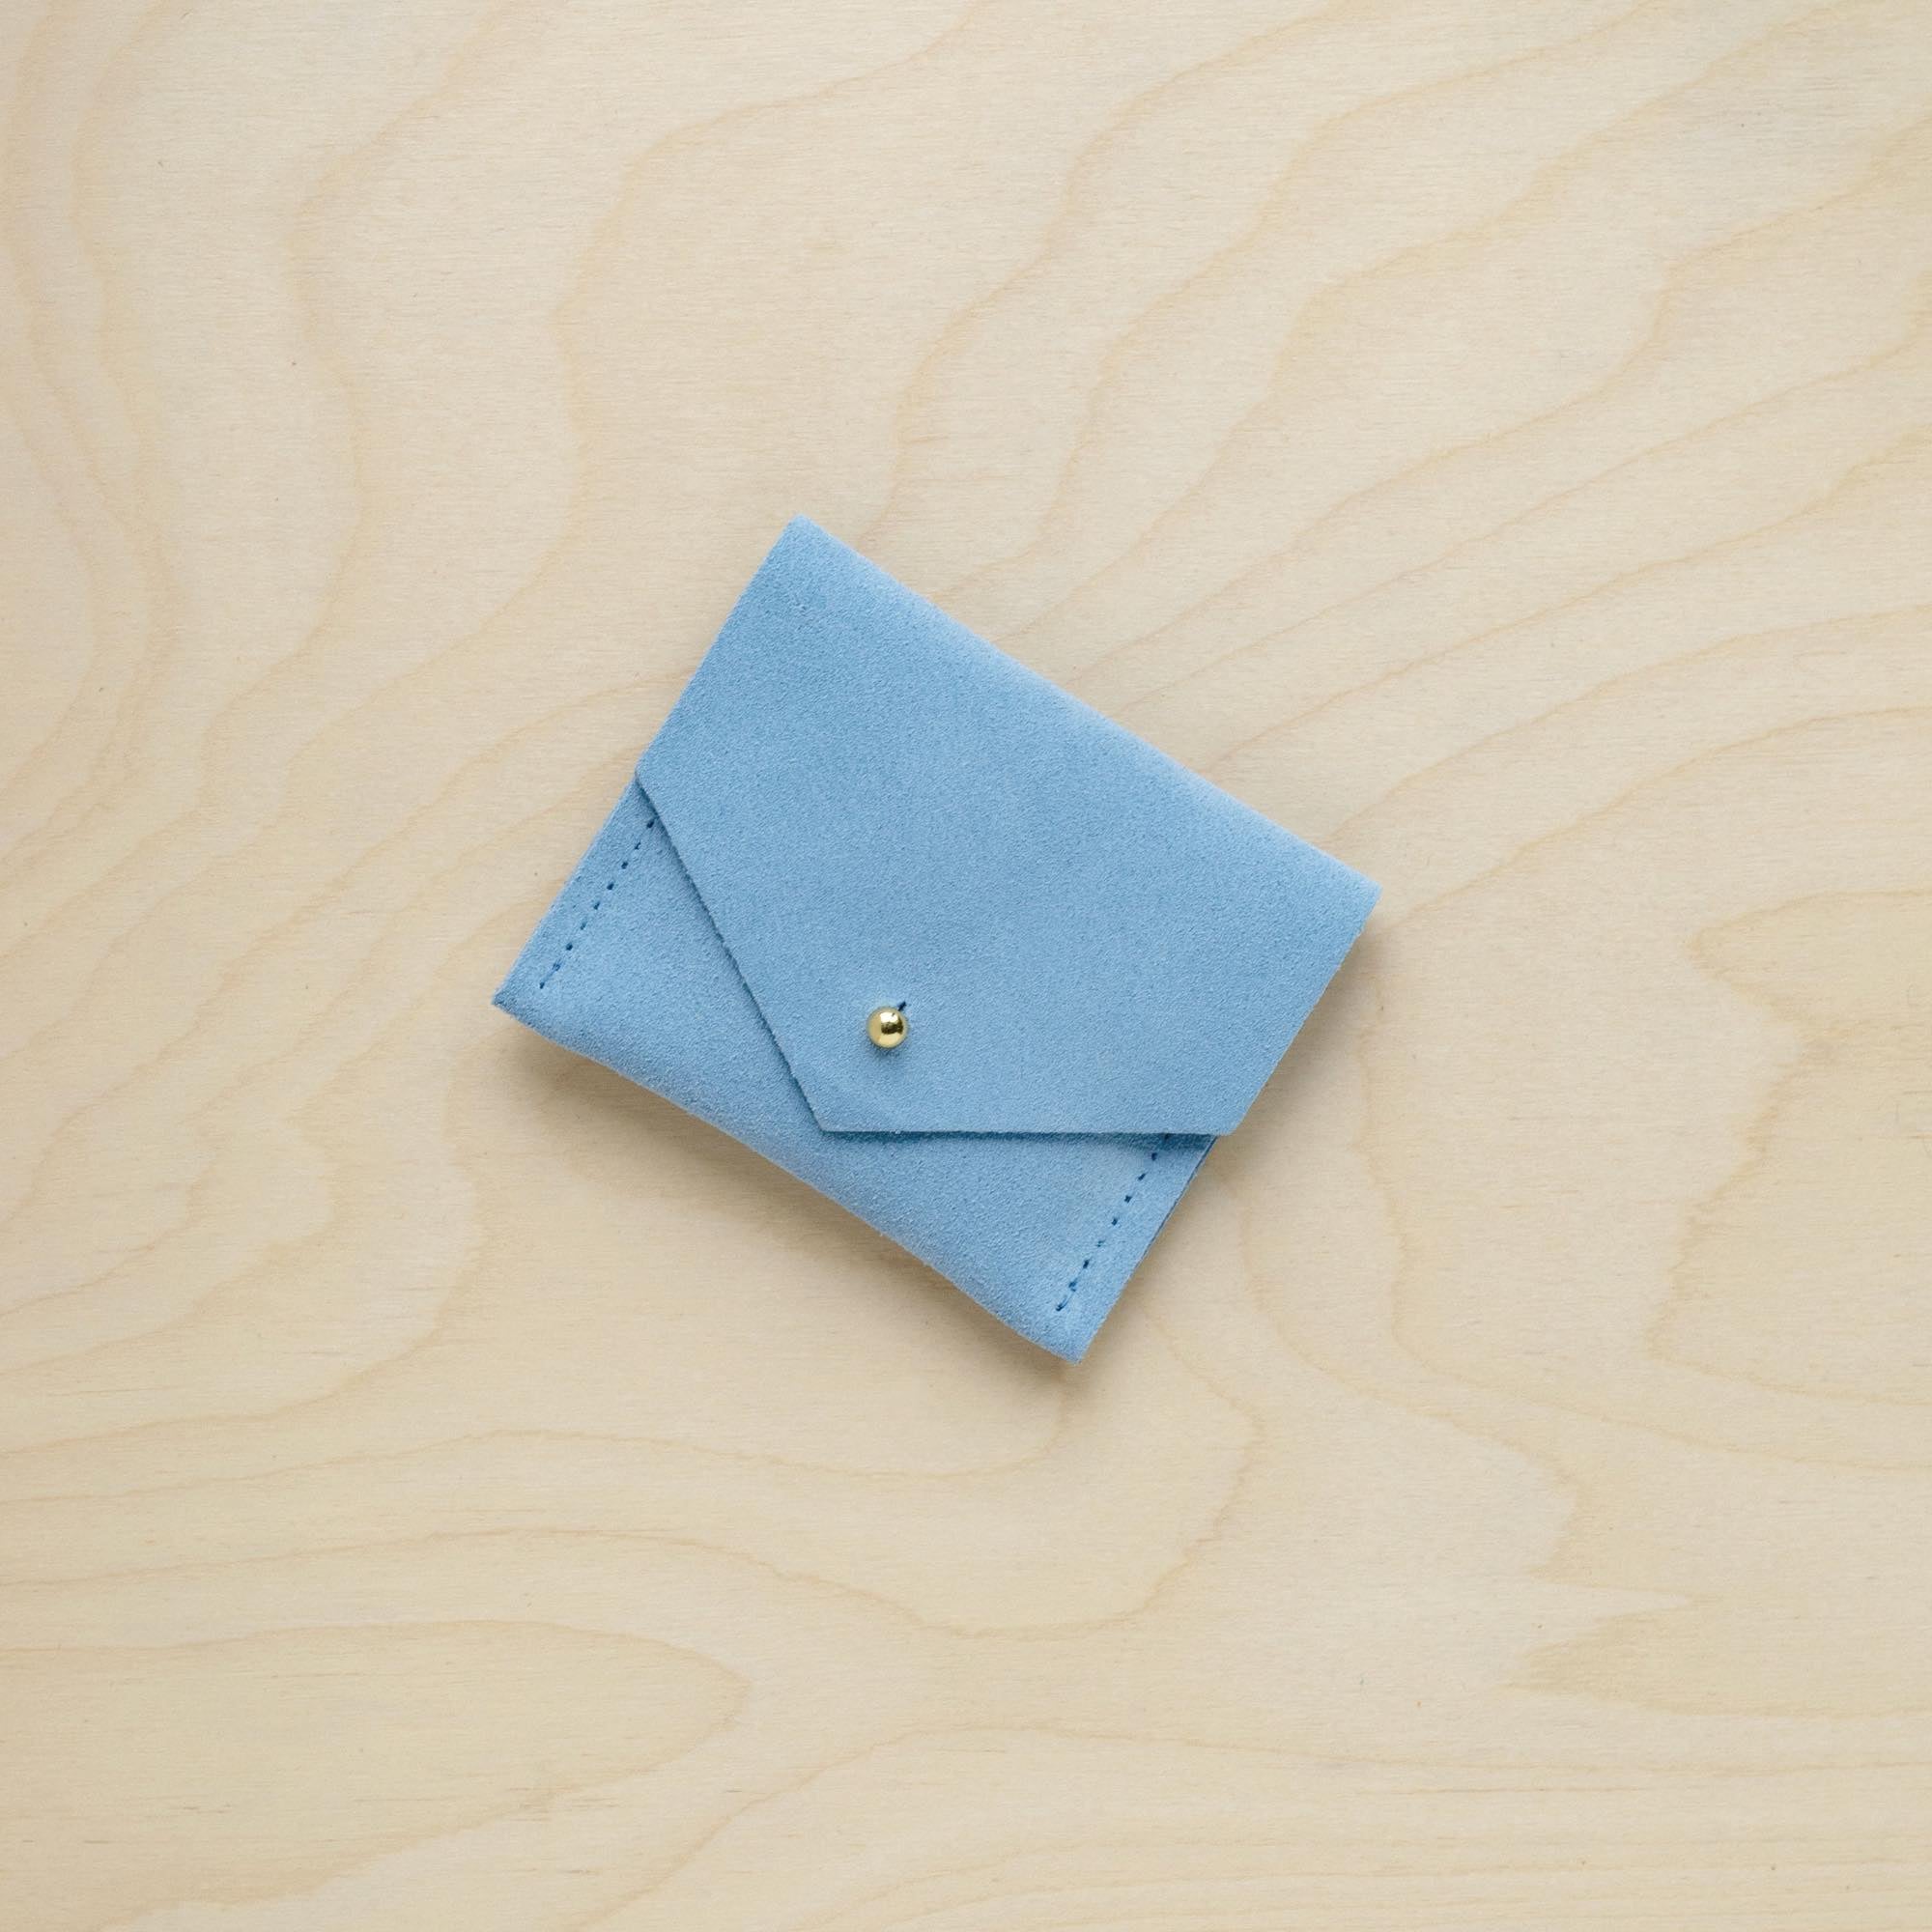 A suede Stitch Markers pouch in Pale Blue. Complete with a stud for secure closing.